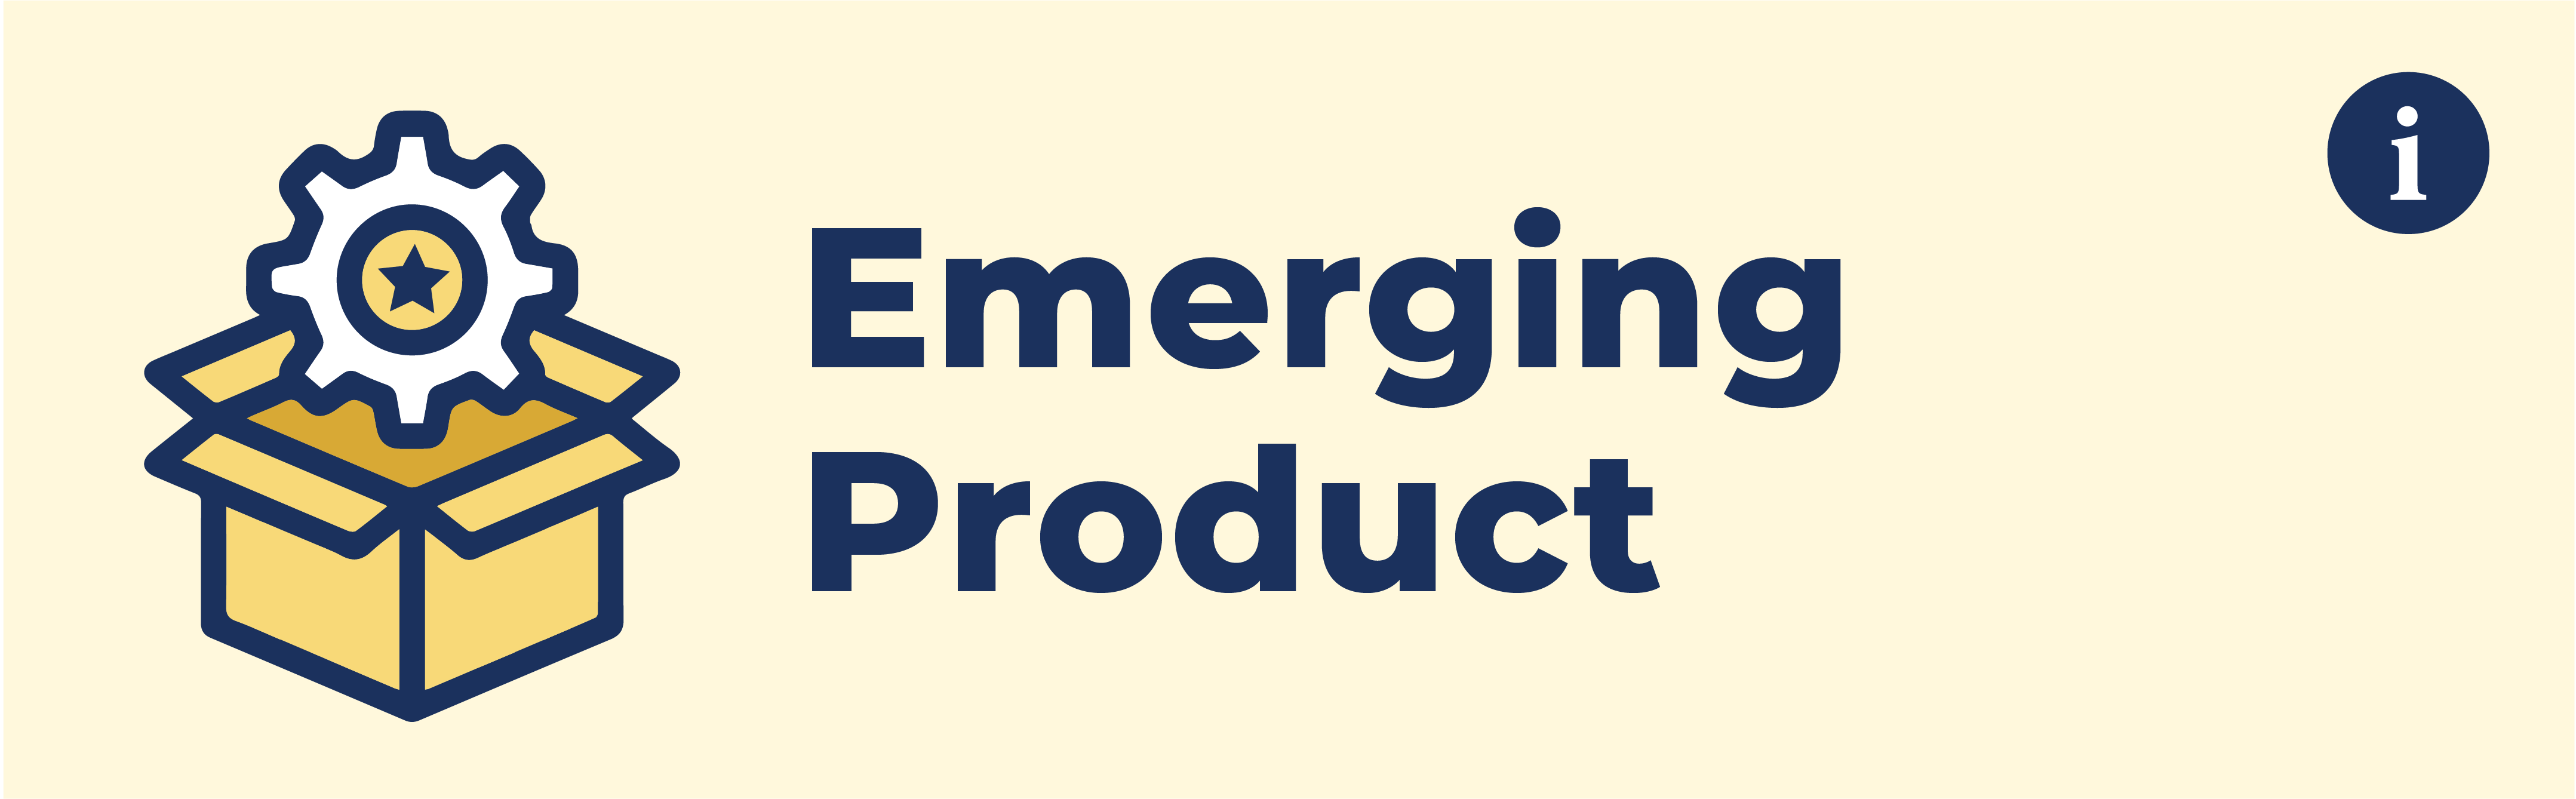 Emerging Product